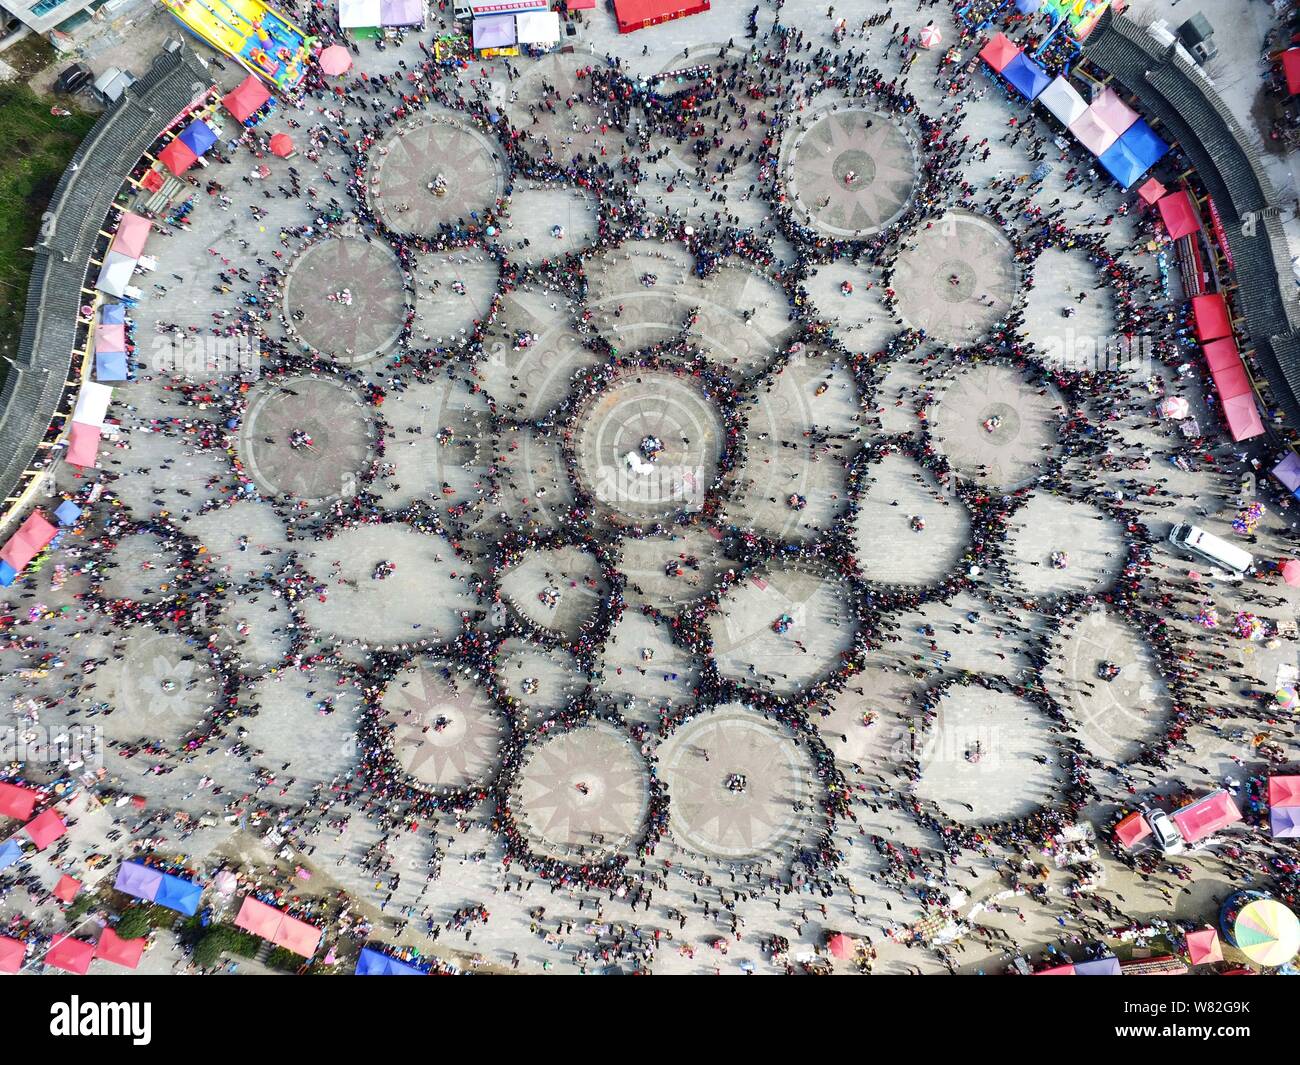 Aerial view of Chinese women of Miao ethnic minority dressed in traditional silver-decorated clothes and headwears performing a group dance in circles Stock Photo